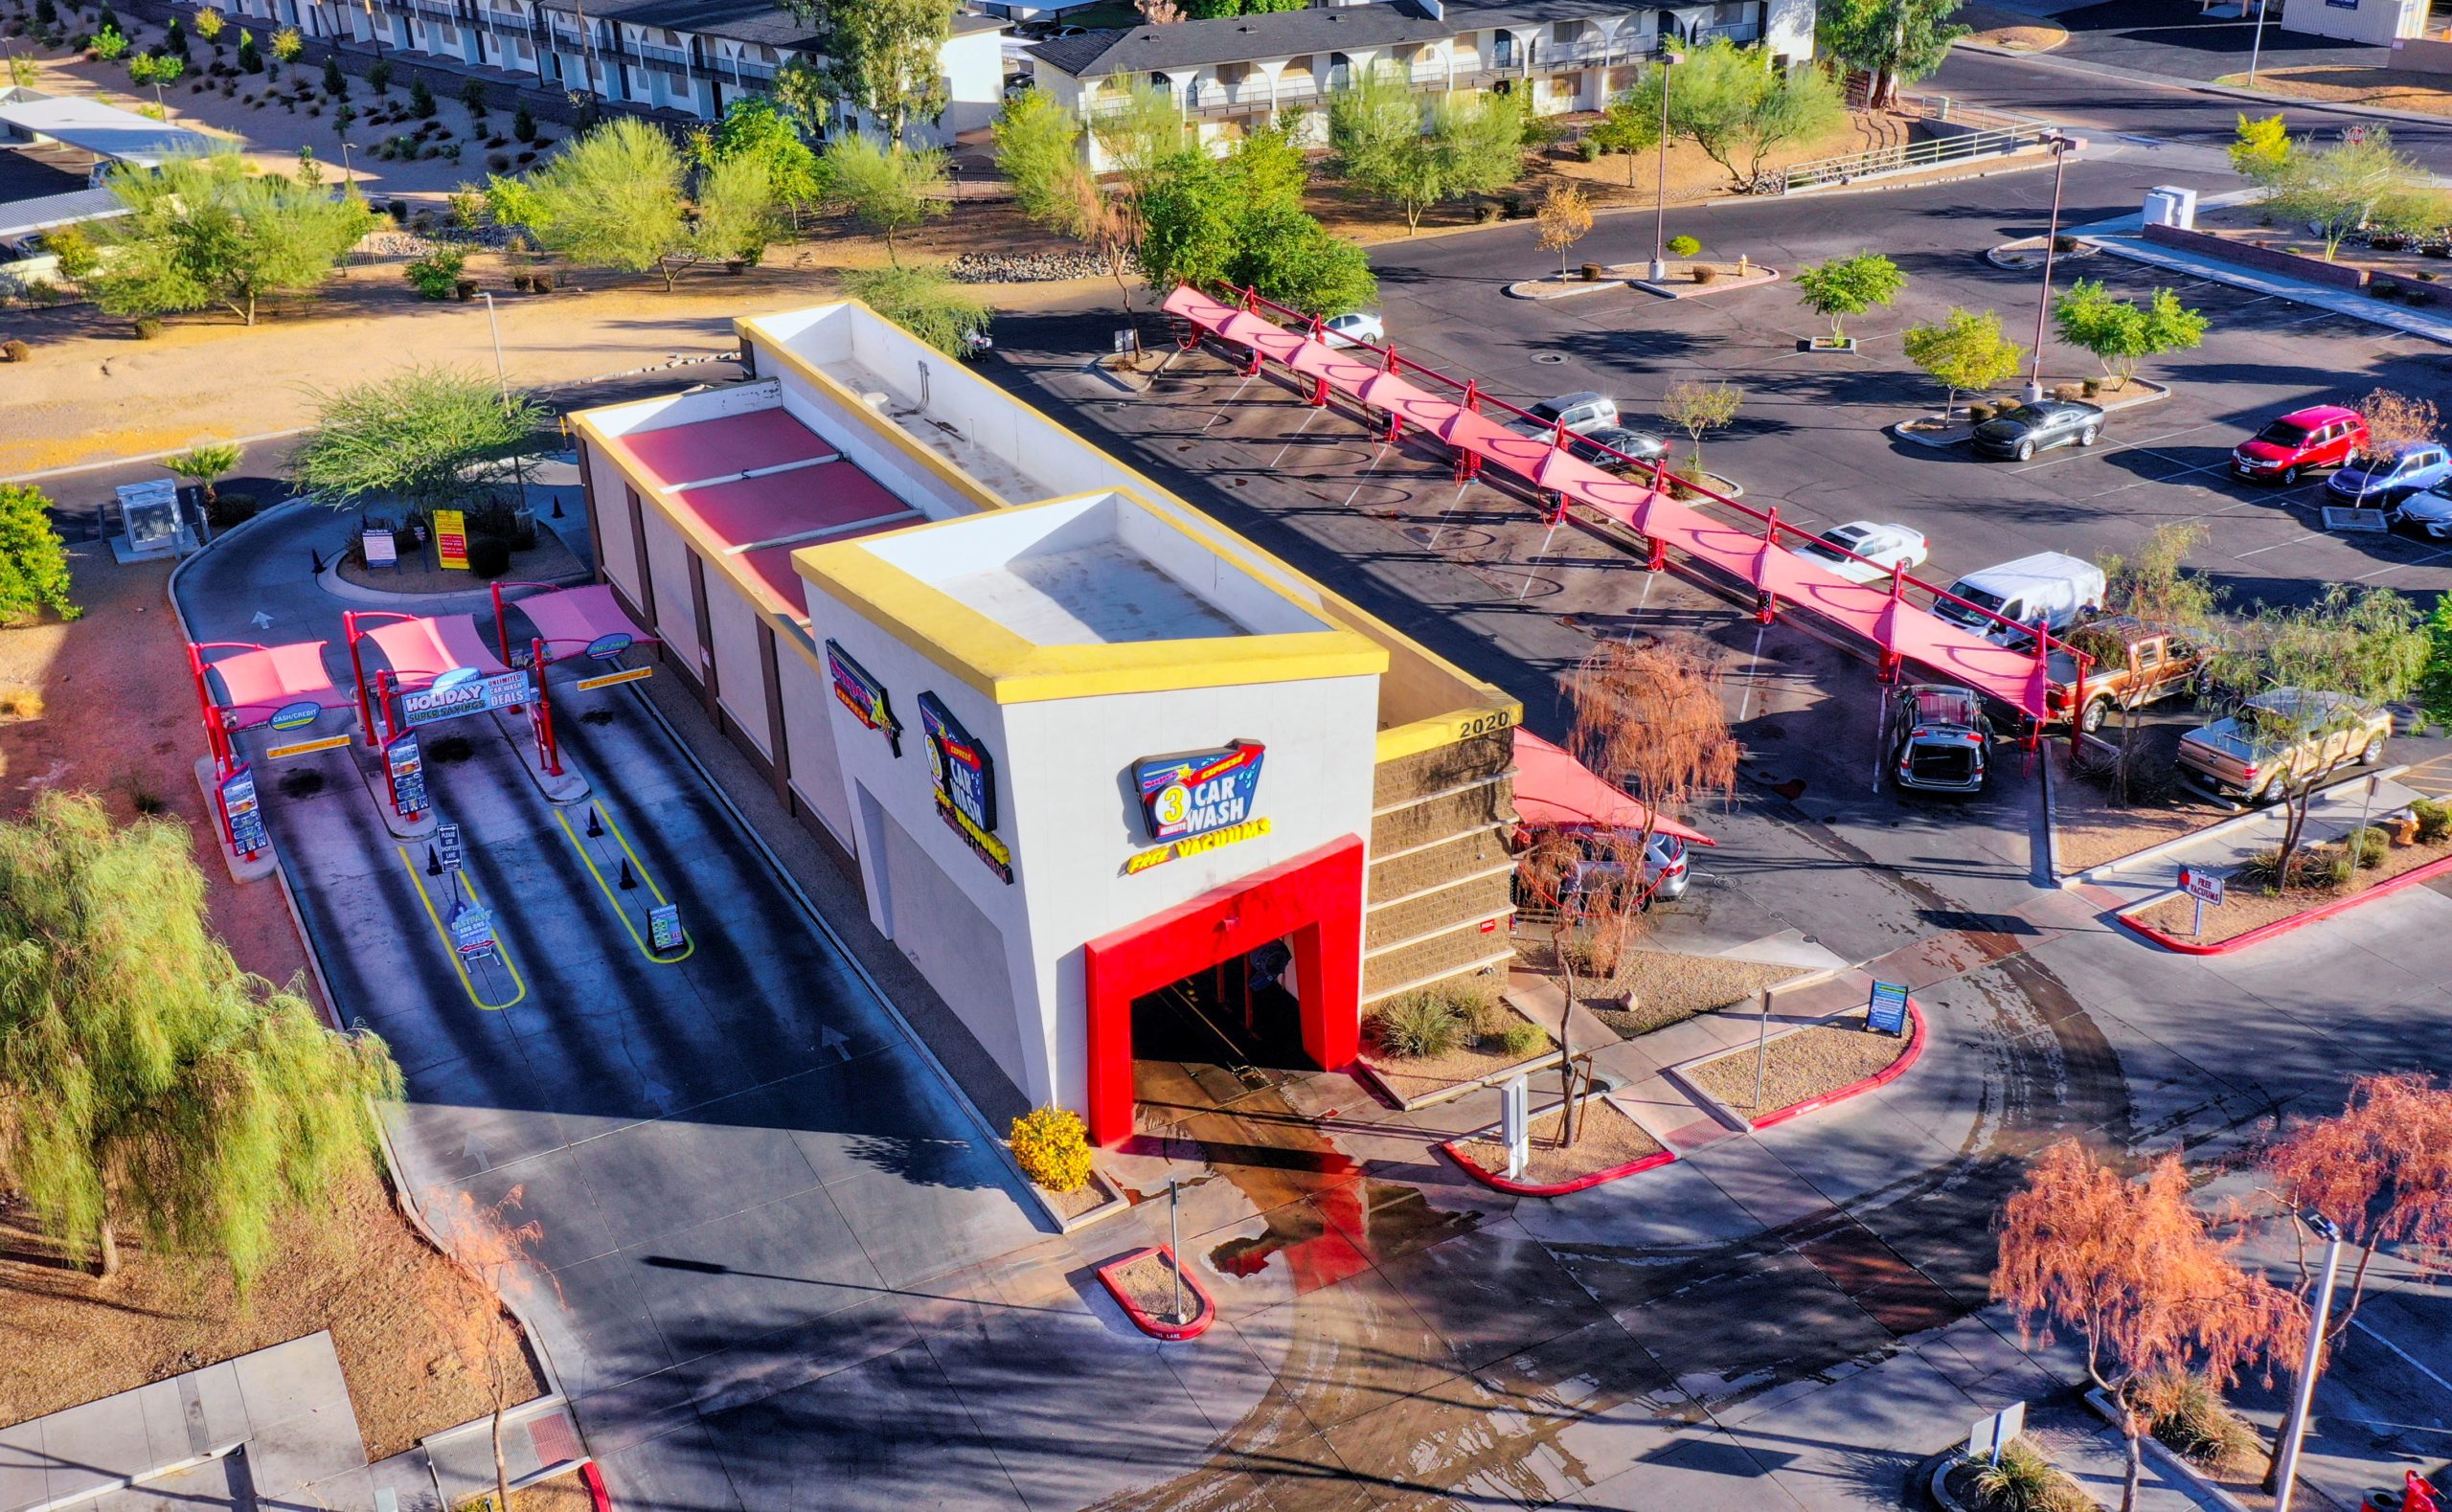 Super Star Car Wash expands with new locations in North Phoenix